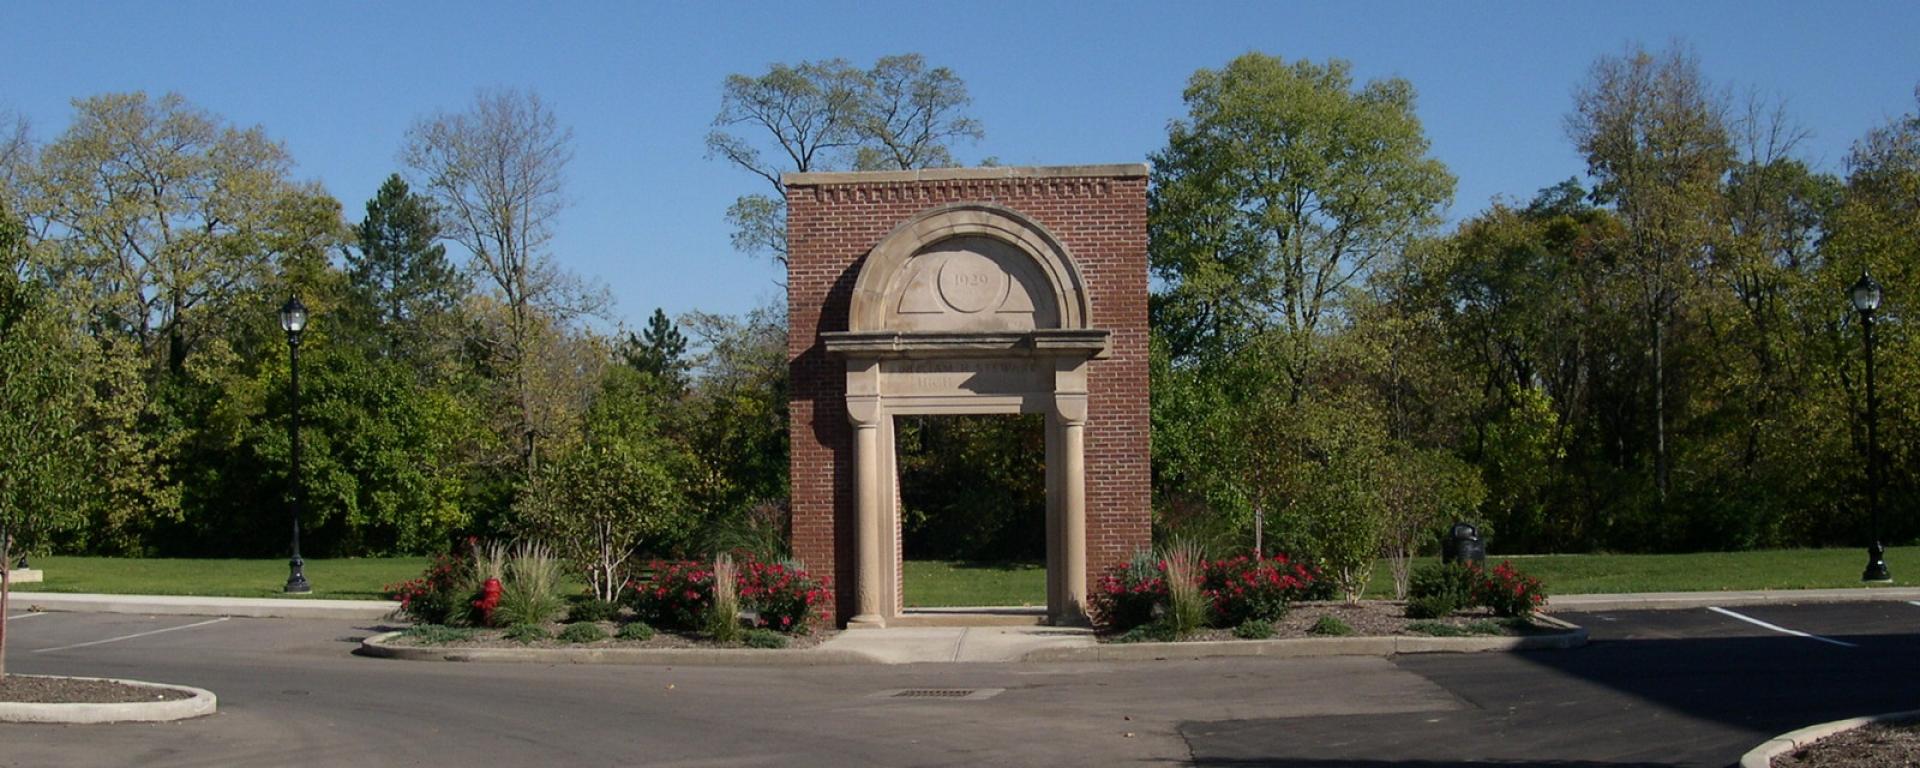 archway in landscaping